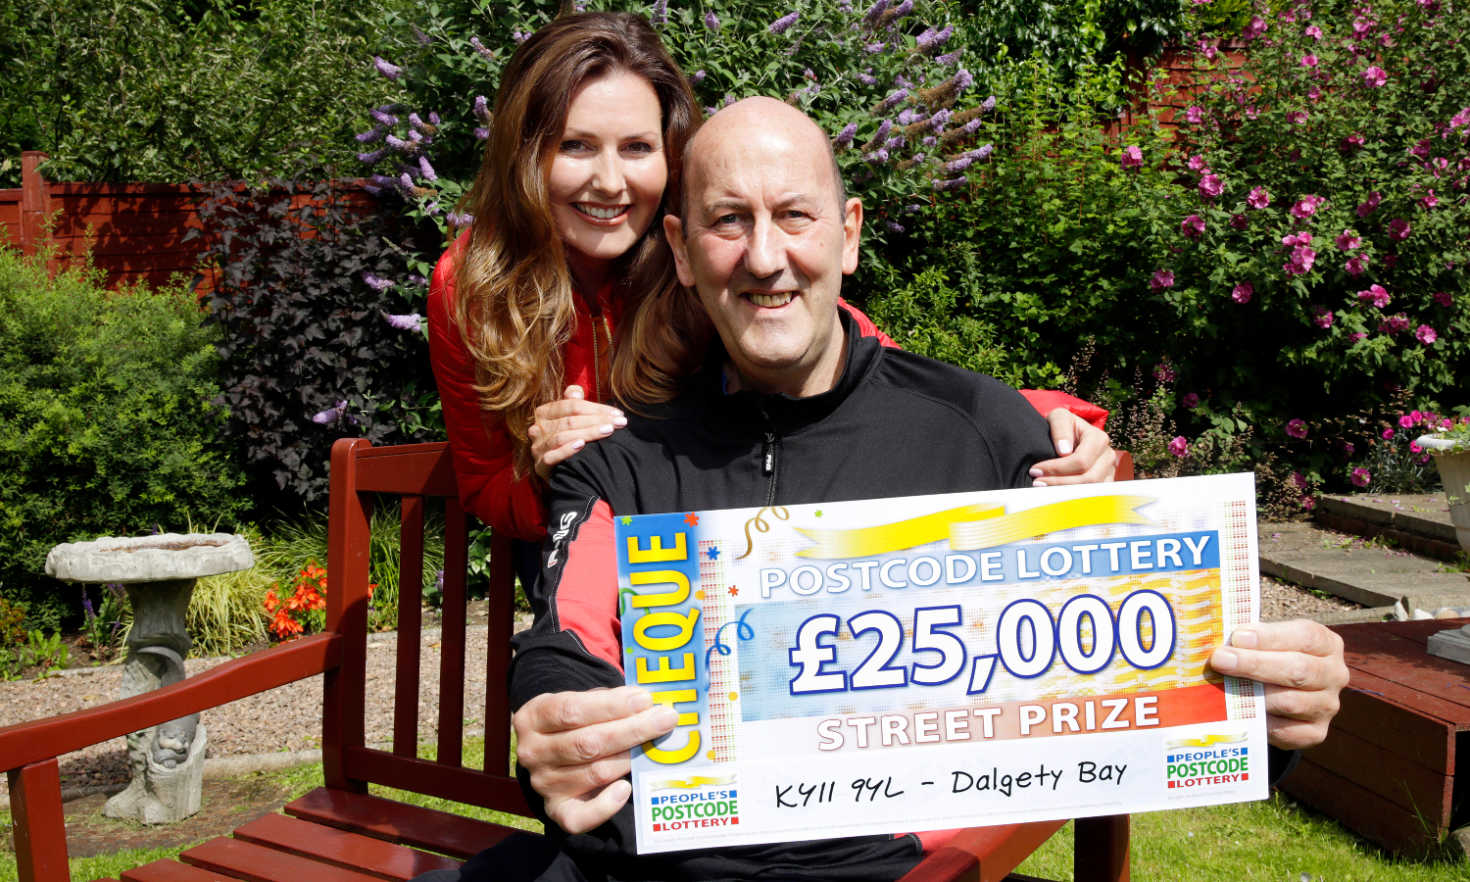 Norman Milne from Dalgety Bay has won an incredible £25,000 this weekend